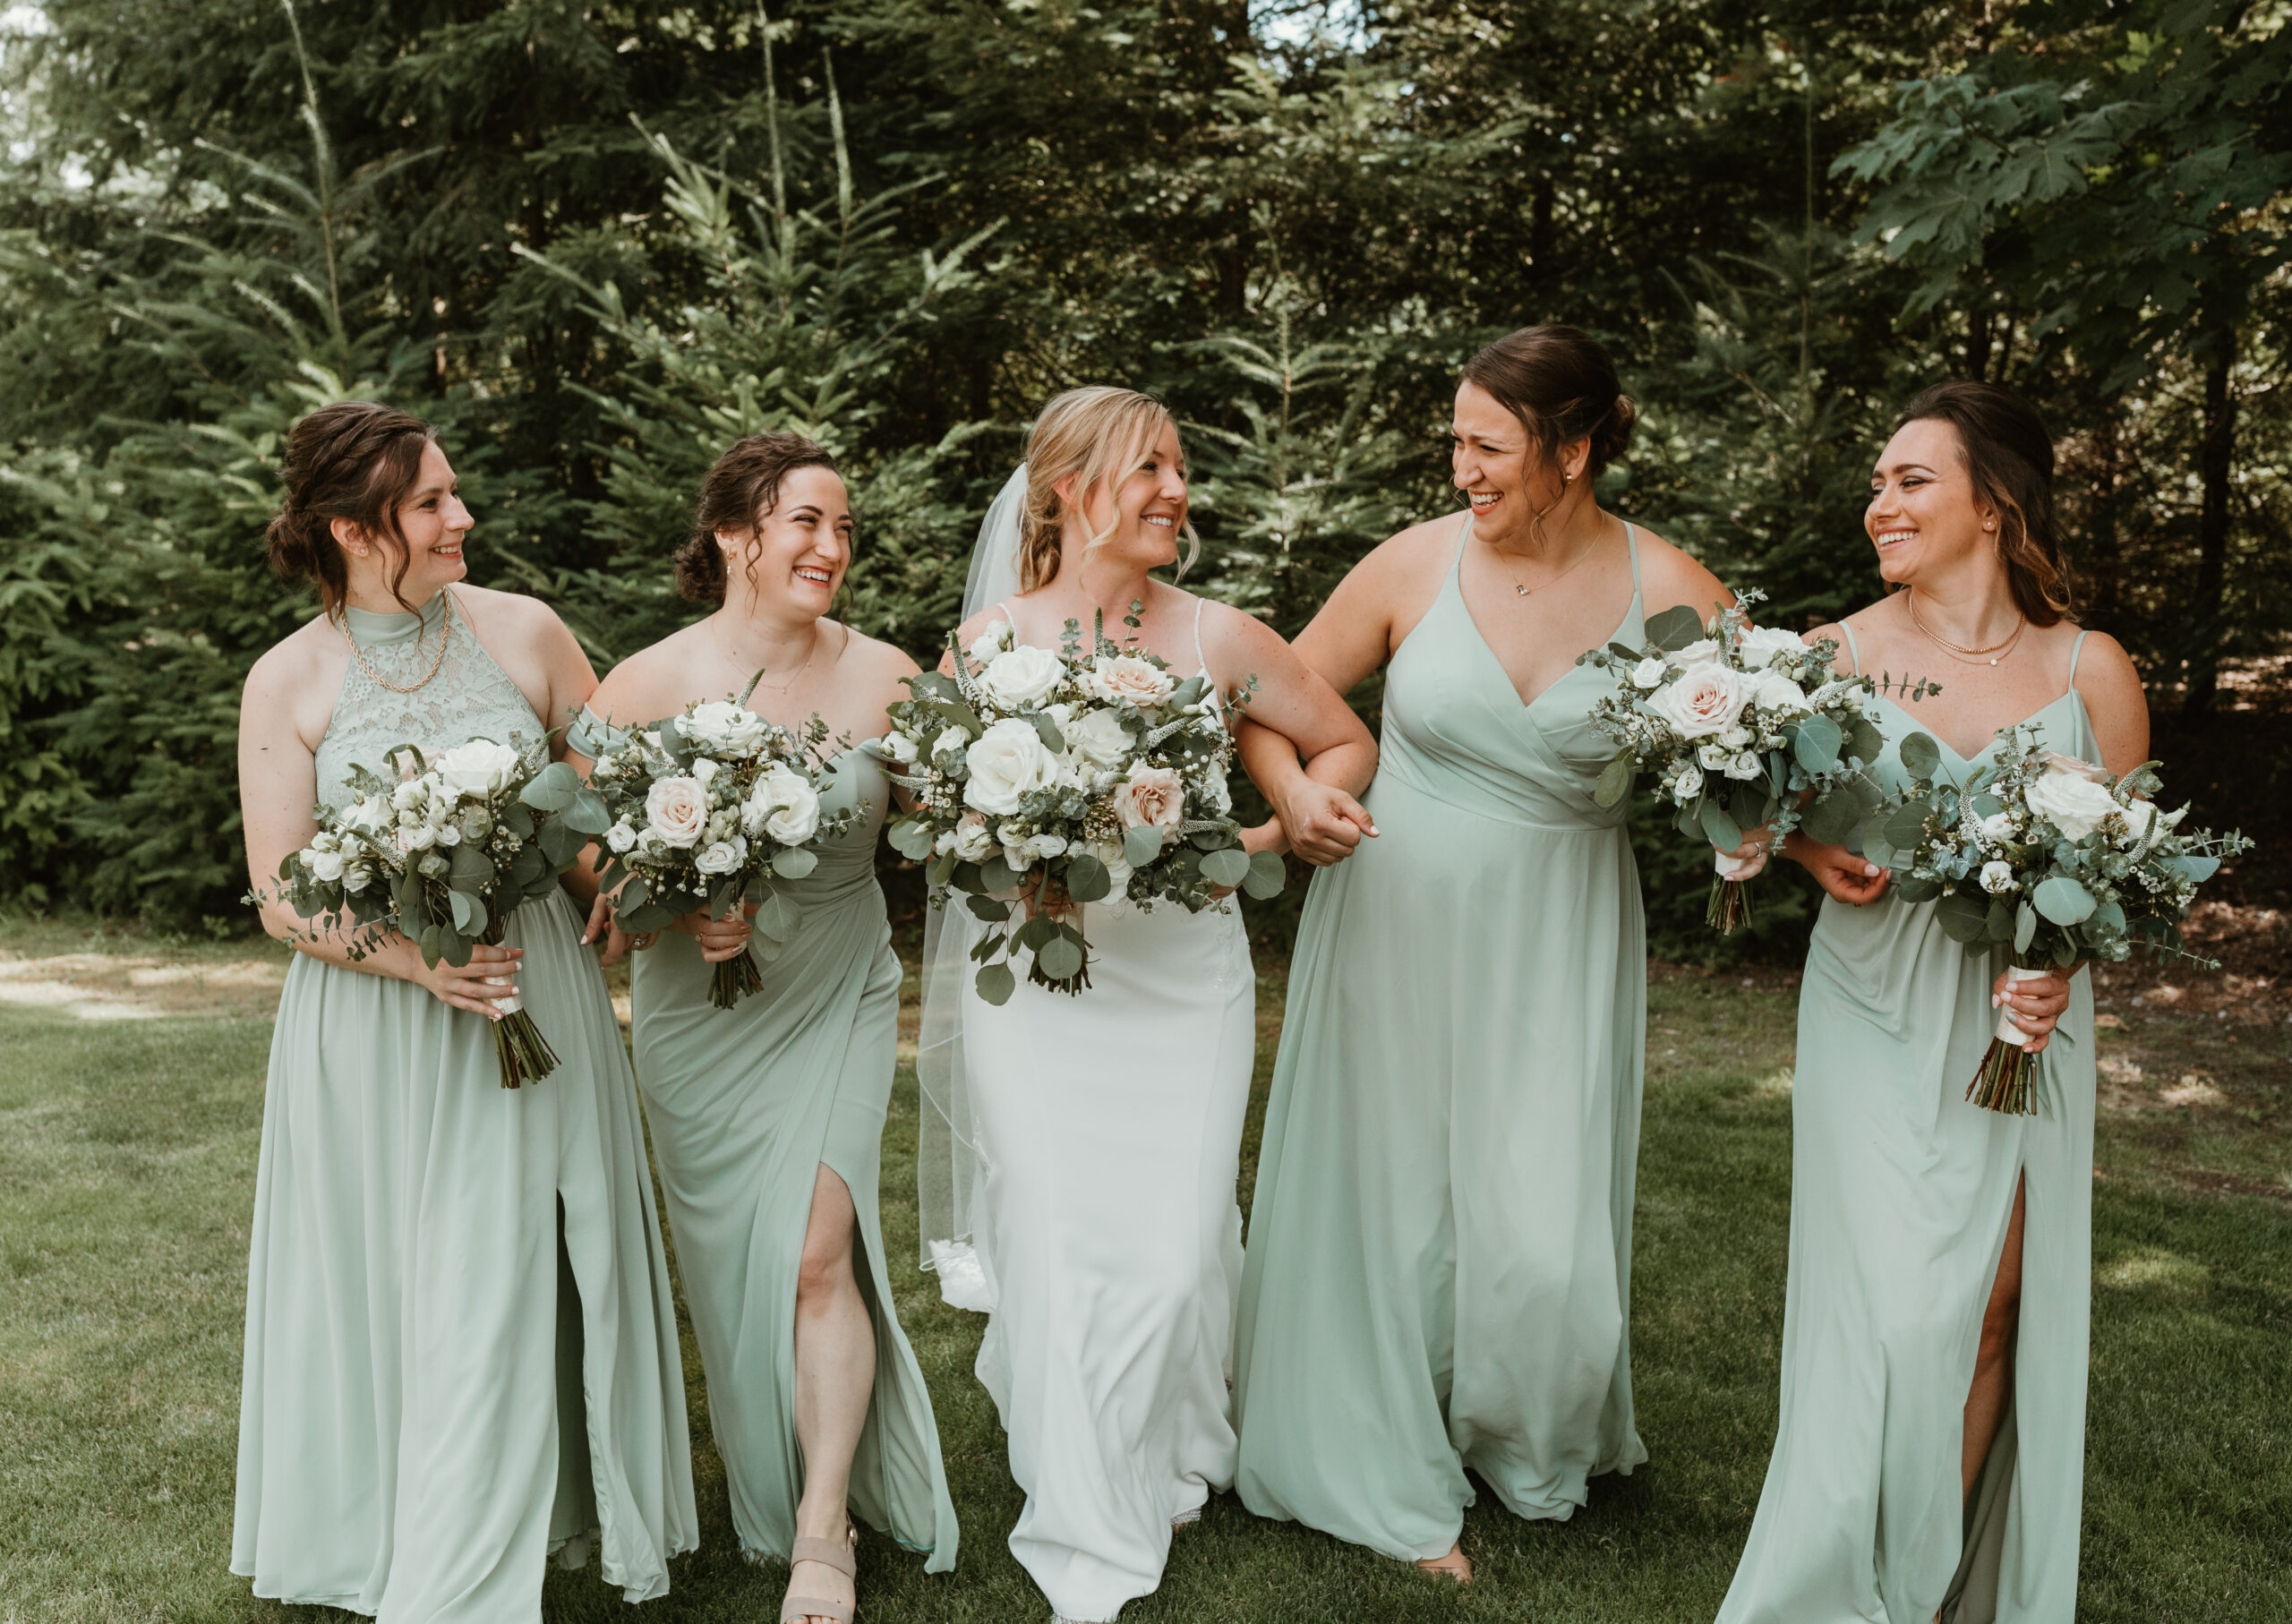 bride and her bridesmaids walking together and laughing